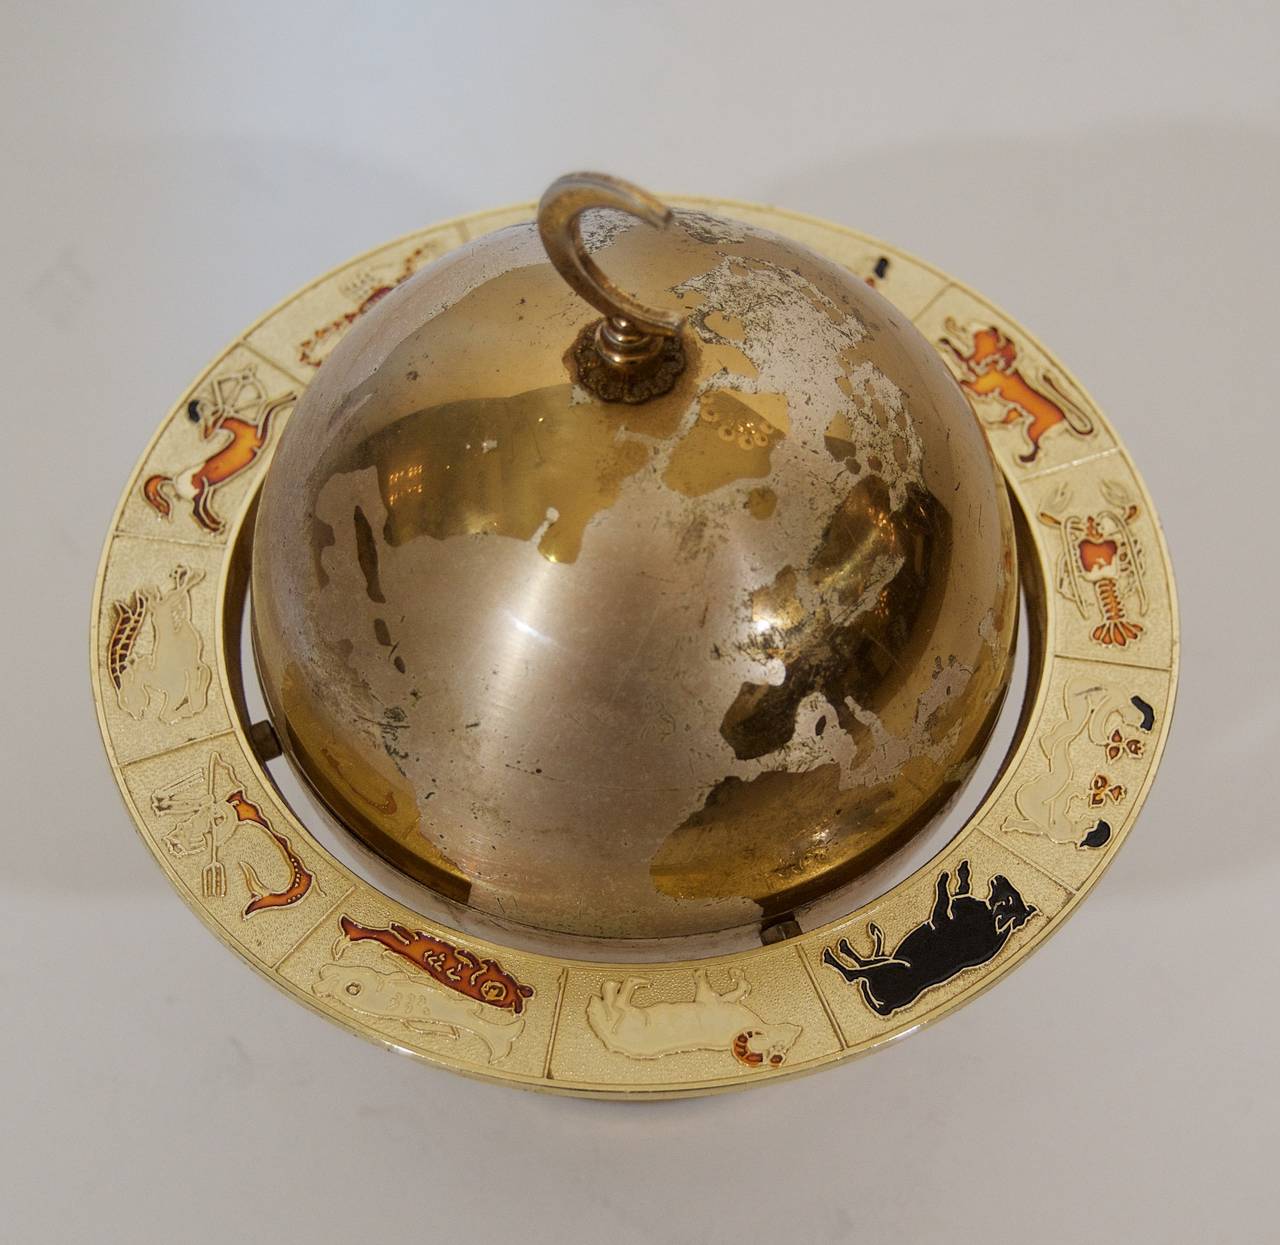 Unusual Mid-Century cigarette holder, the upper hemisphere extending to reveal cigarette storage. Surrounding by an unusual enameled brass ring with the signs of the Zodiac. Brass, enamel and nickel plating.